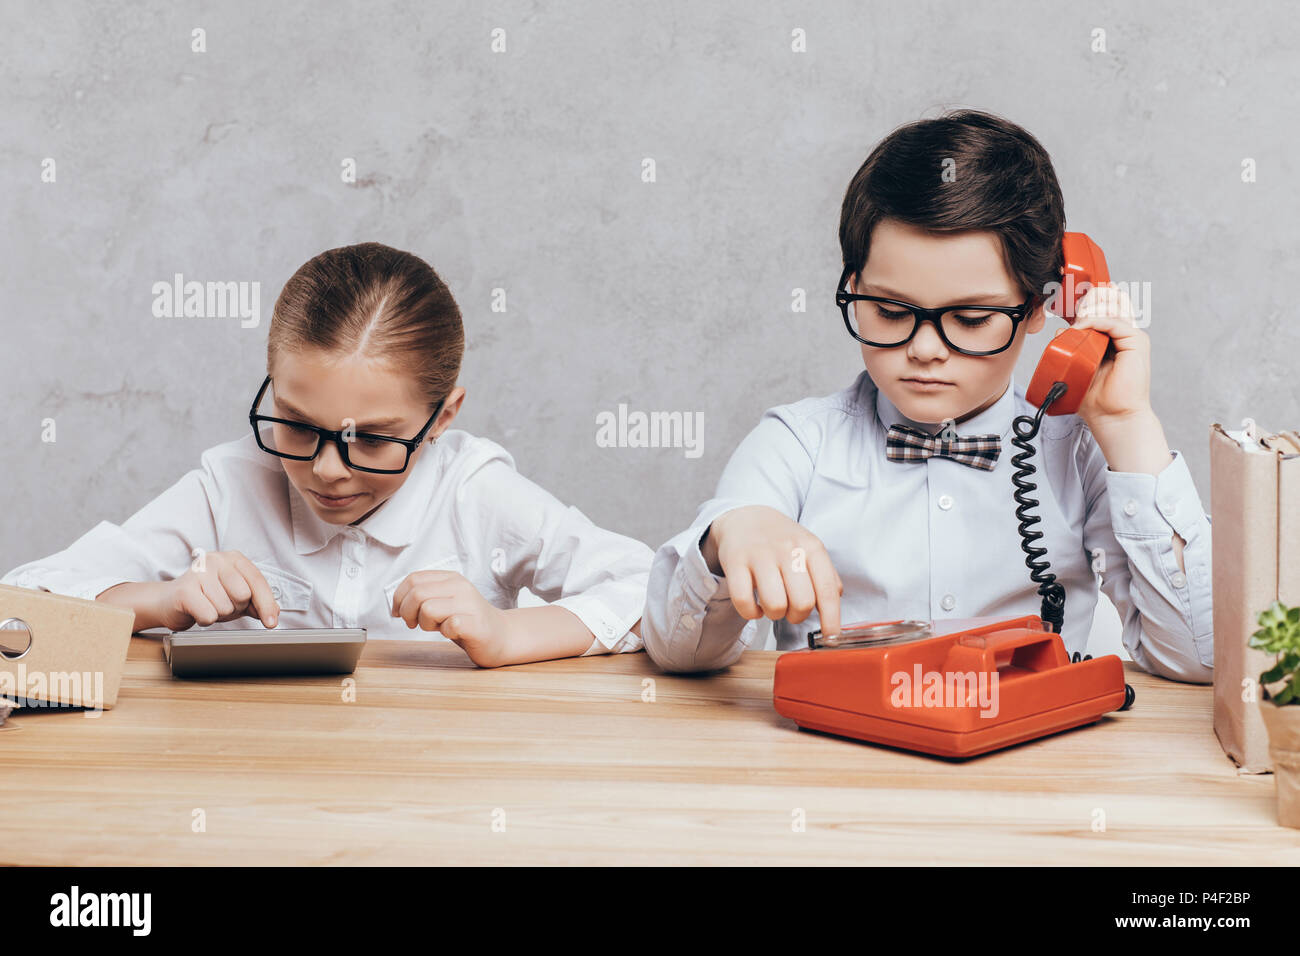 portrait of concentrated children in eyeglasses working together at workplace Stock Photo